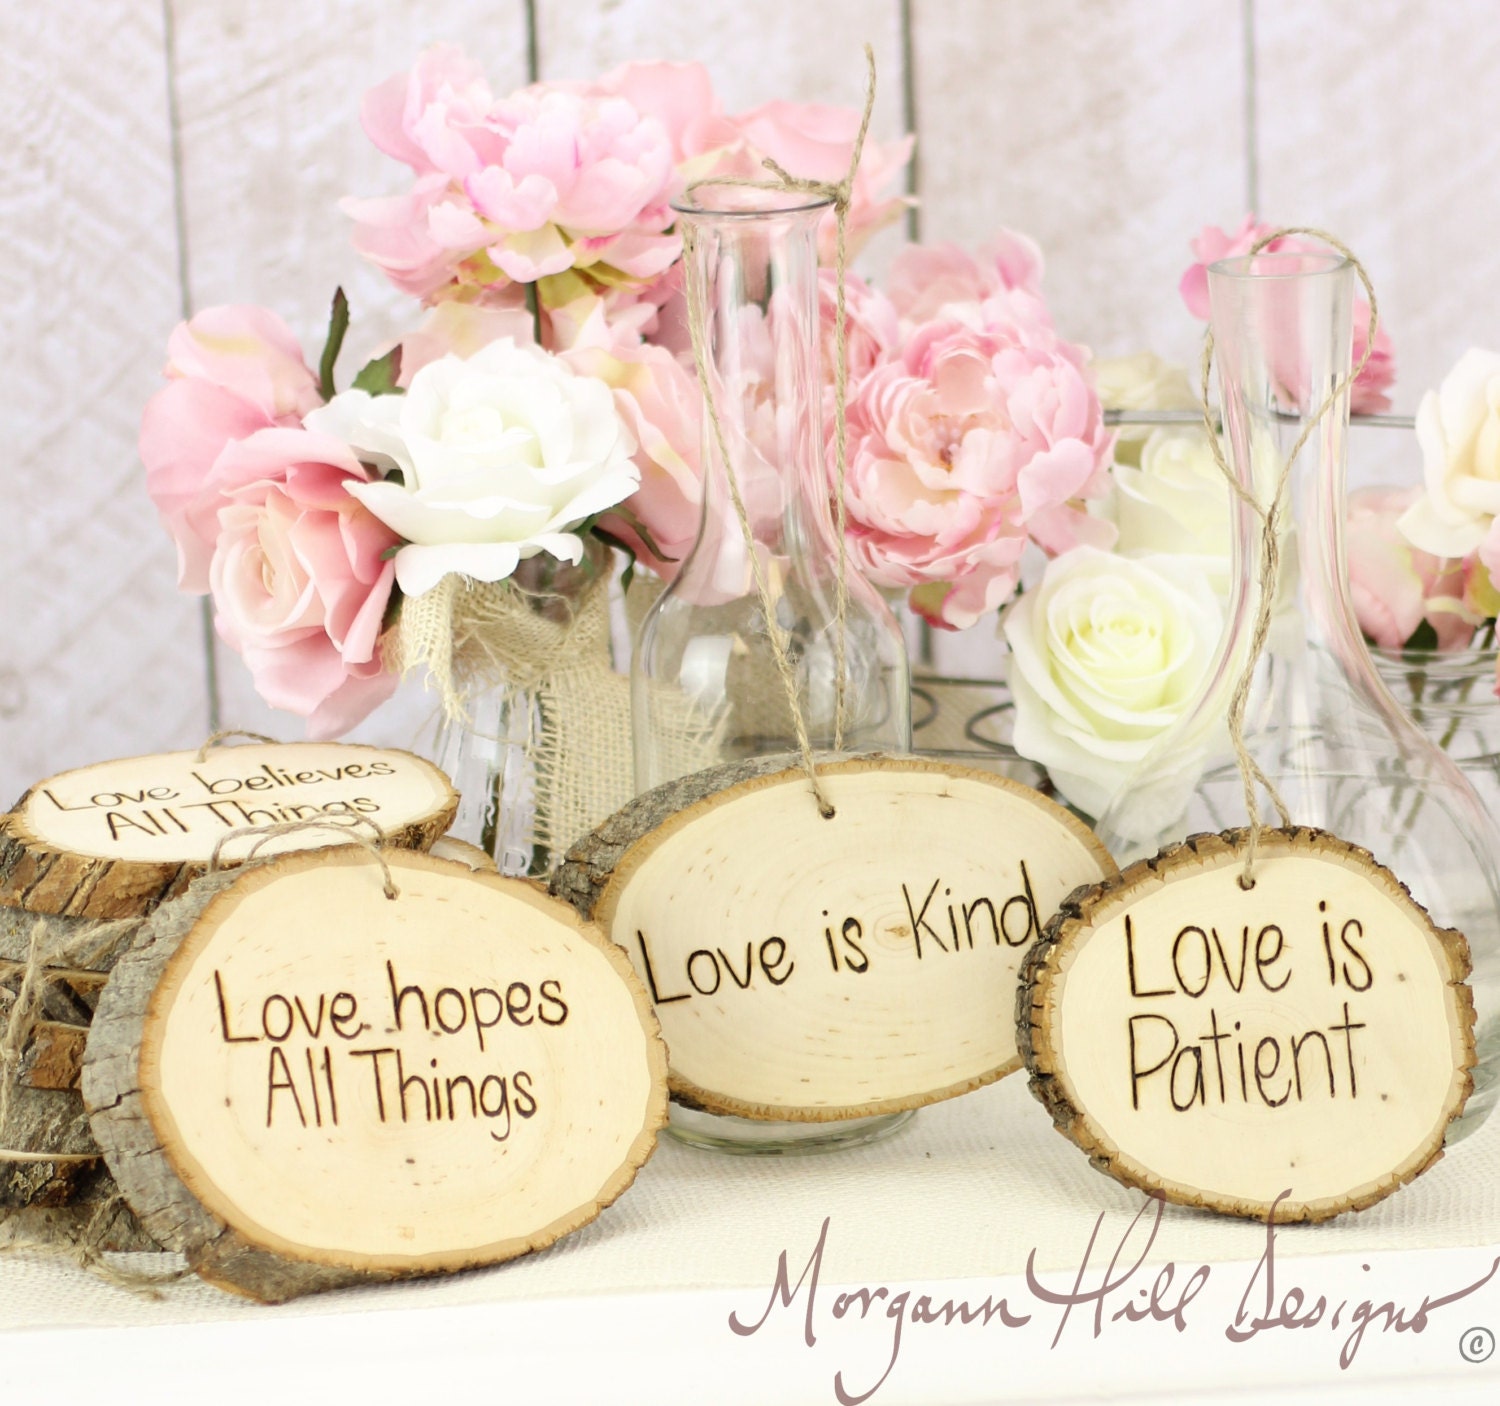 Rustic Tree Slice Wedding Signs Love Is Patient by braggingbags